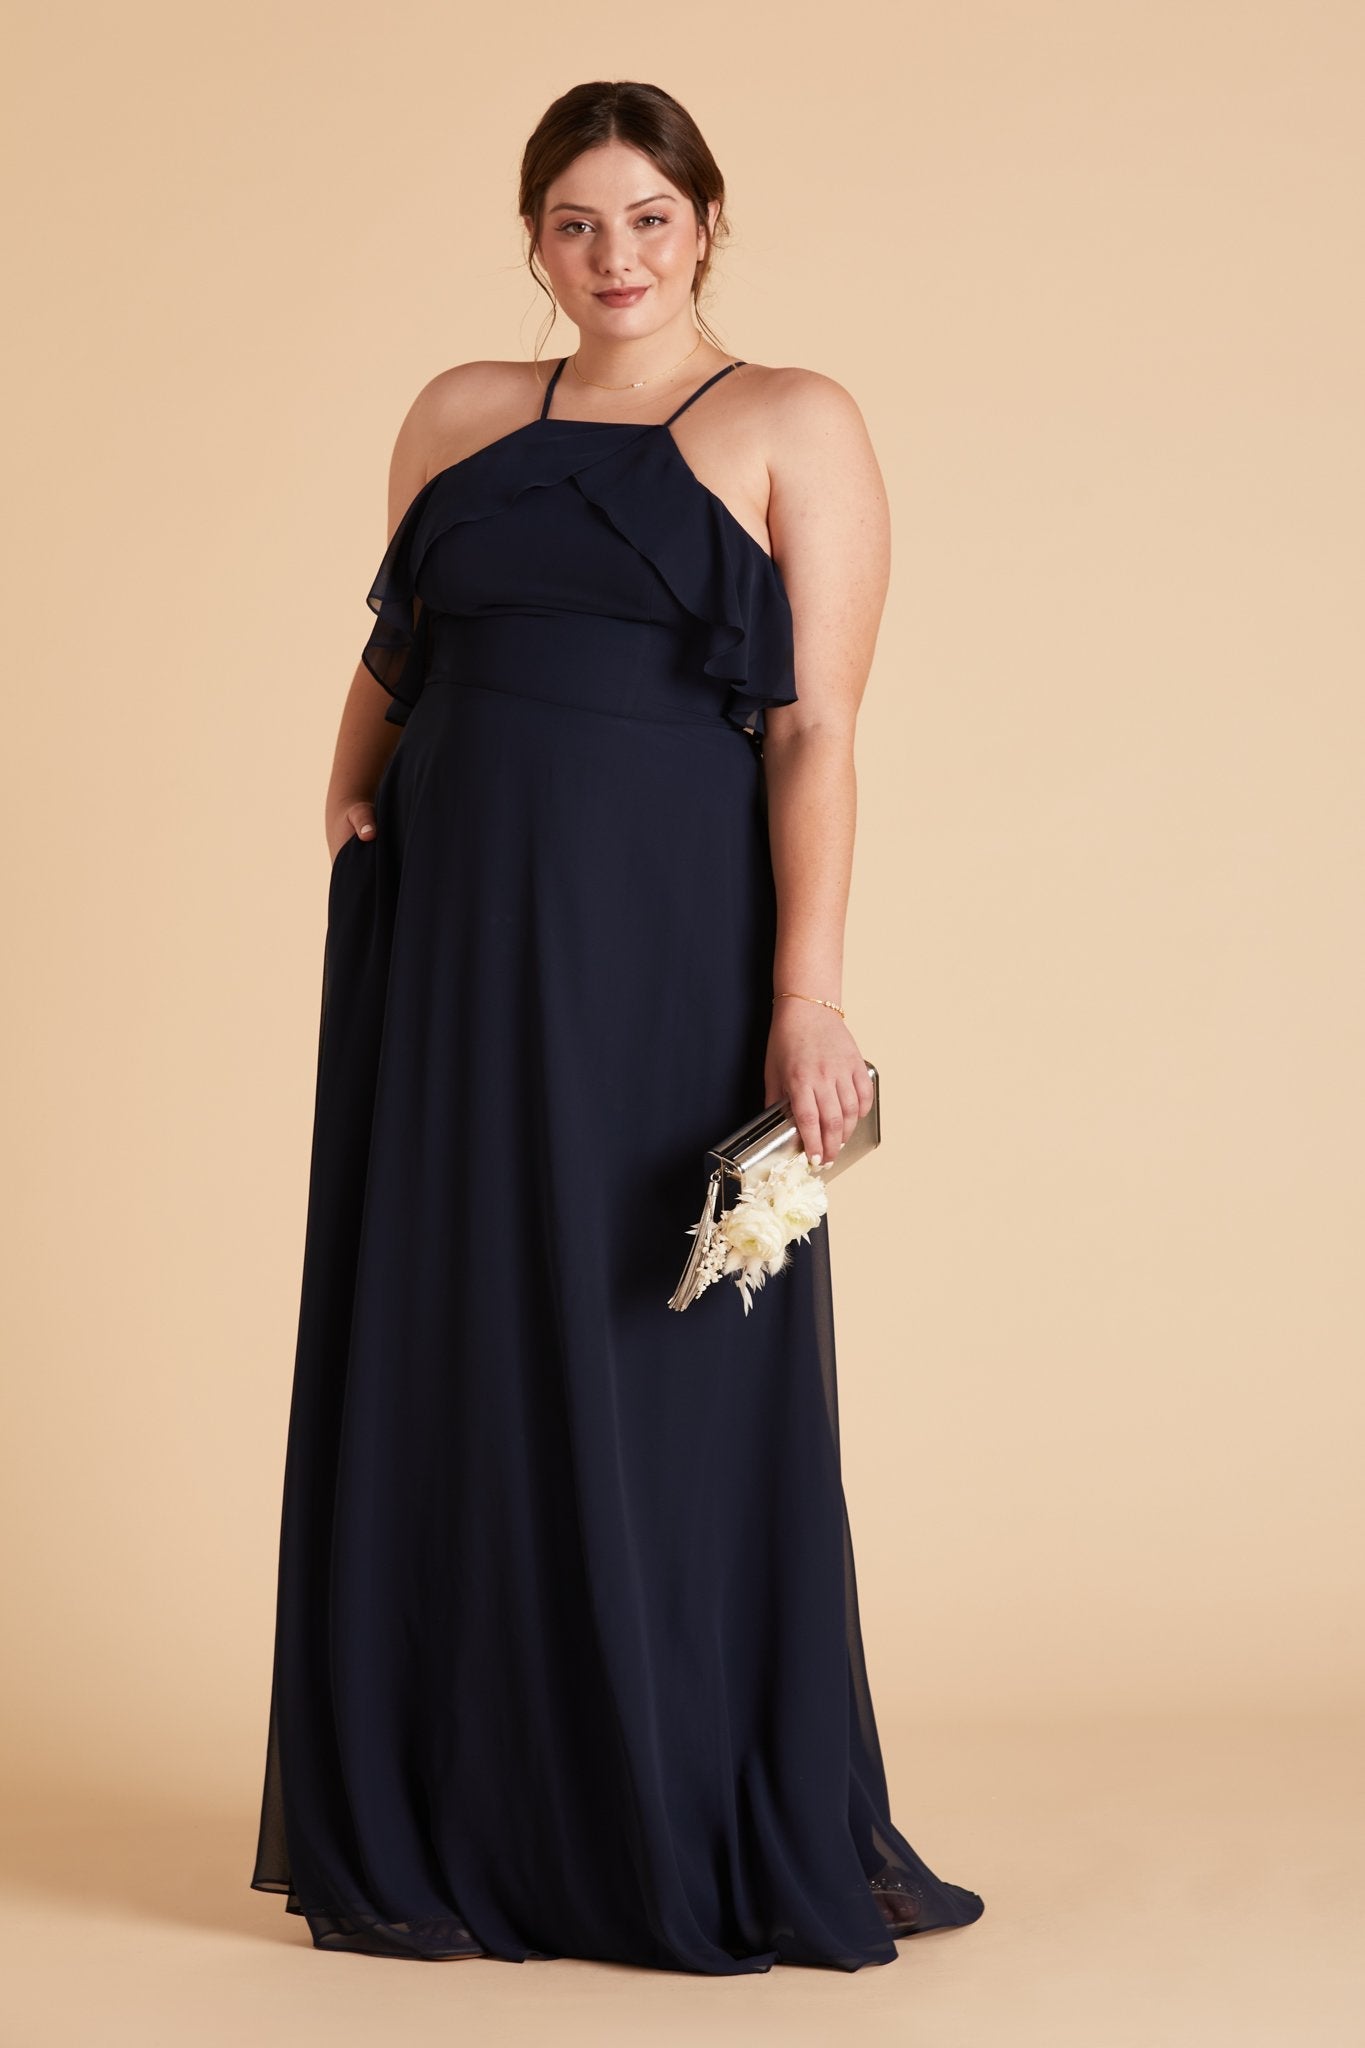 Jules plus size bridesmaid dress in navy blue chiffon by Birdy Grey, side view with hand in pocket